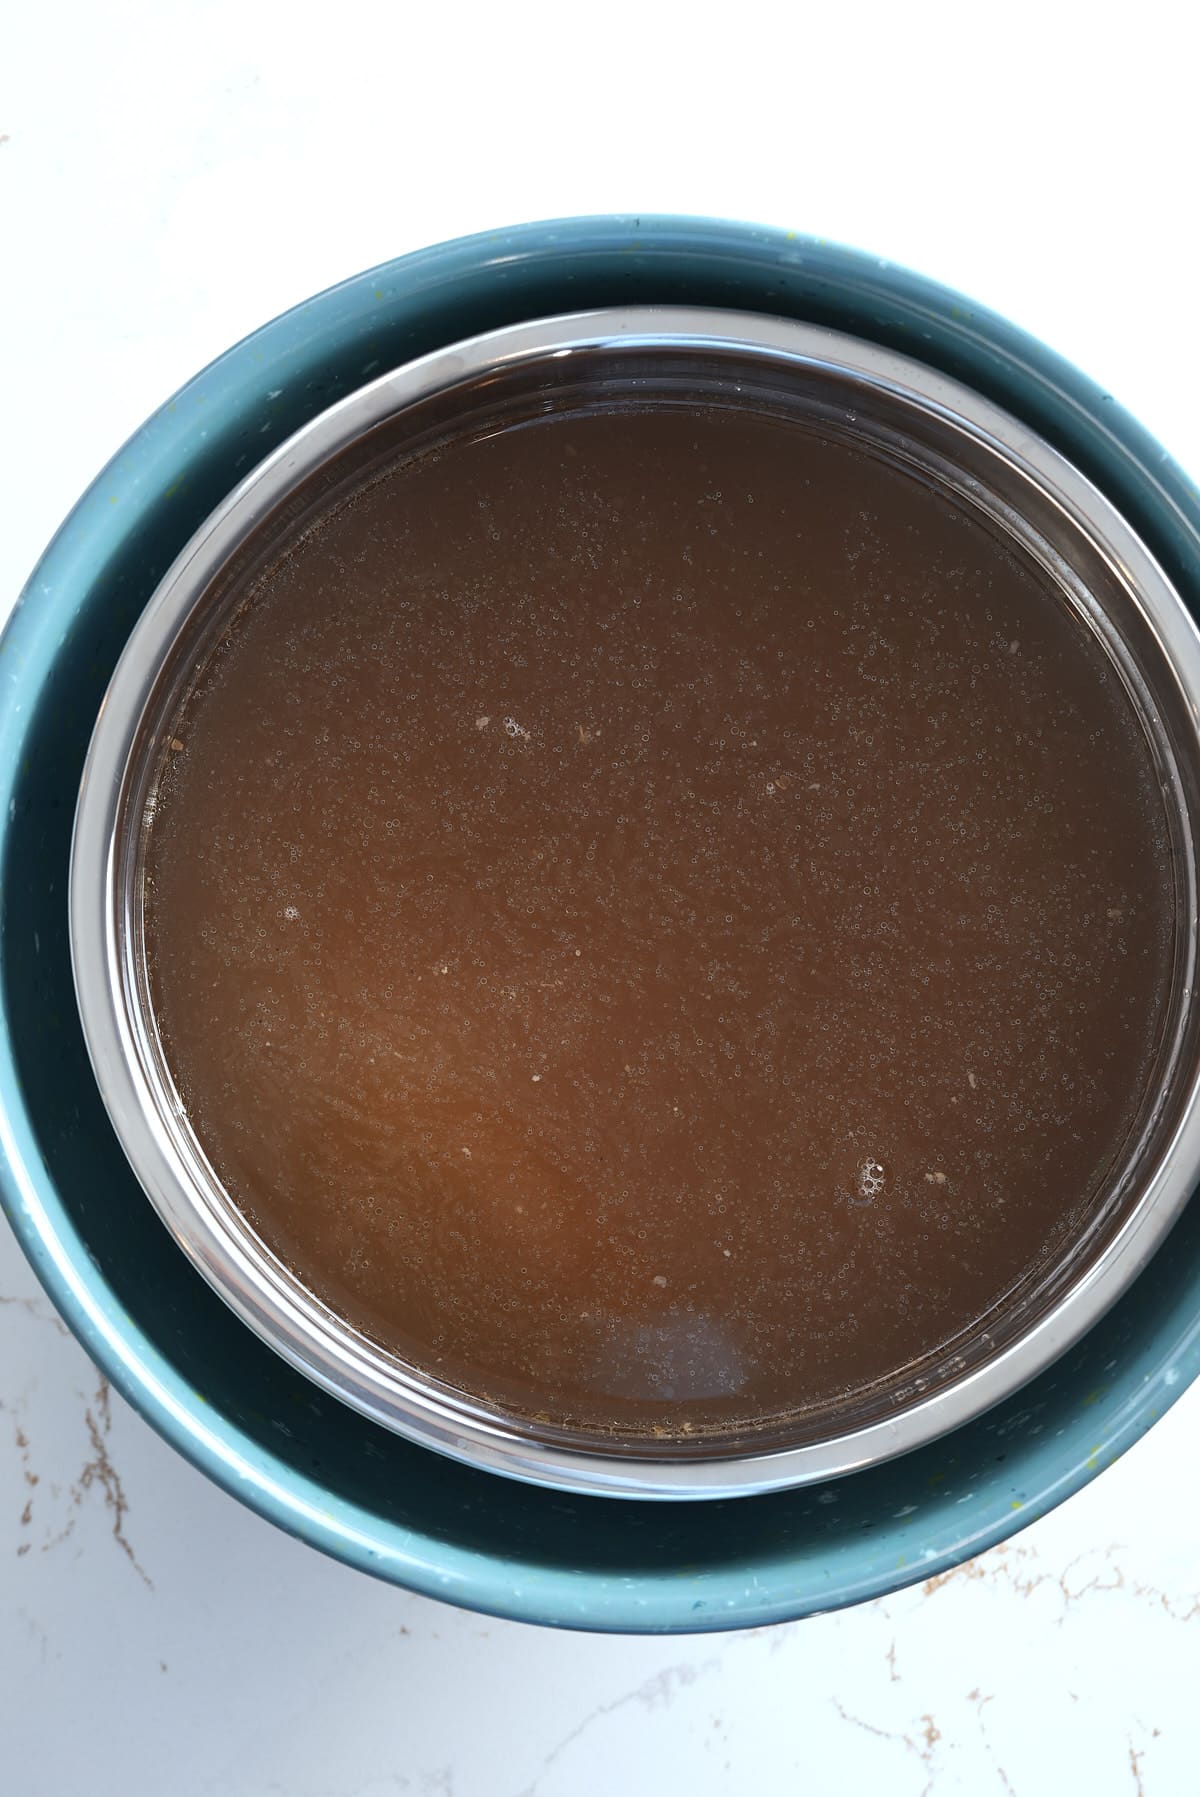 A pot of turkey stock being set inside a bowl of ice cubes to cool.